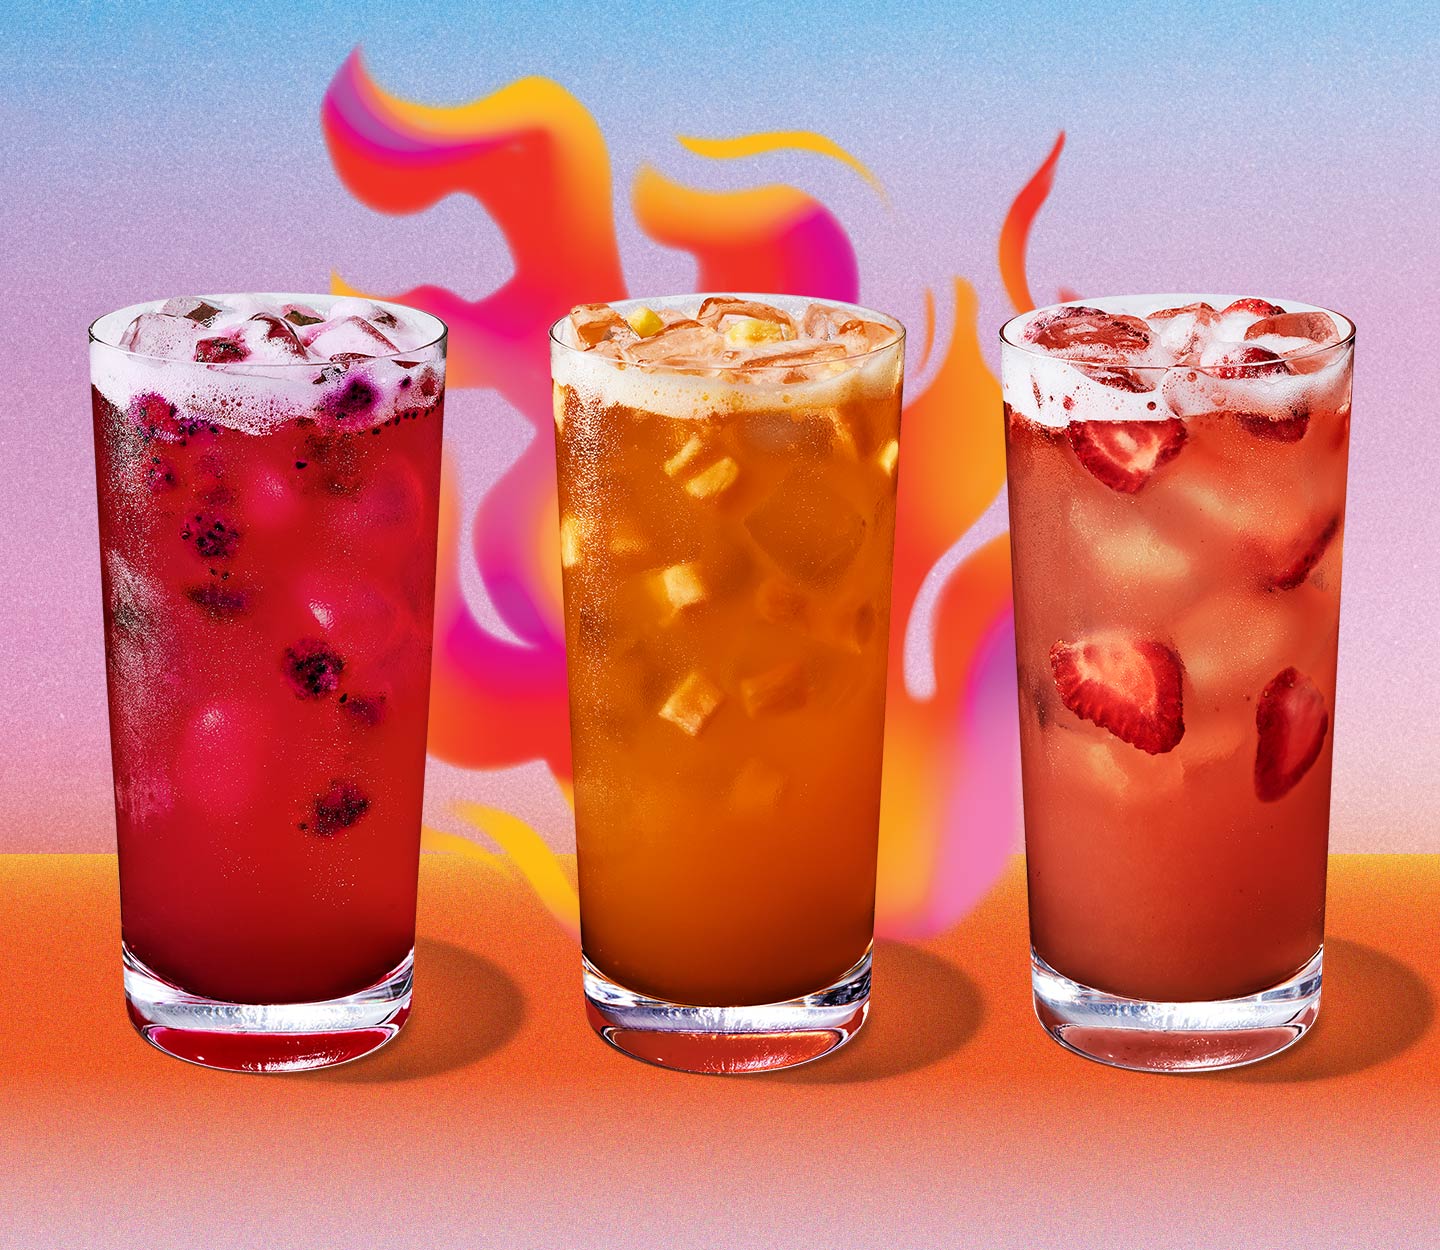 Three red, cold drinks with pieces of fruit in them. The shade of red progresses from pink to orange.